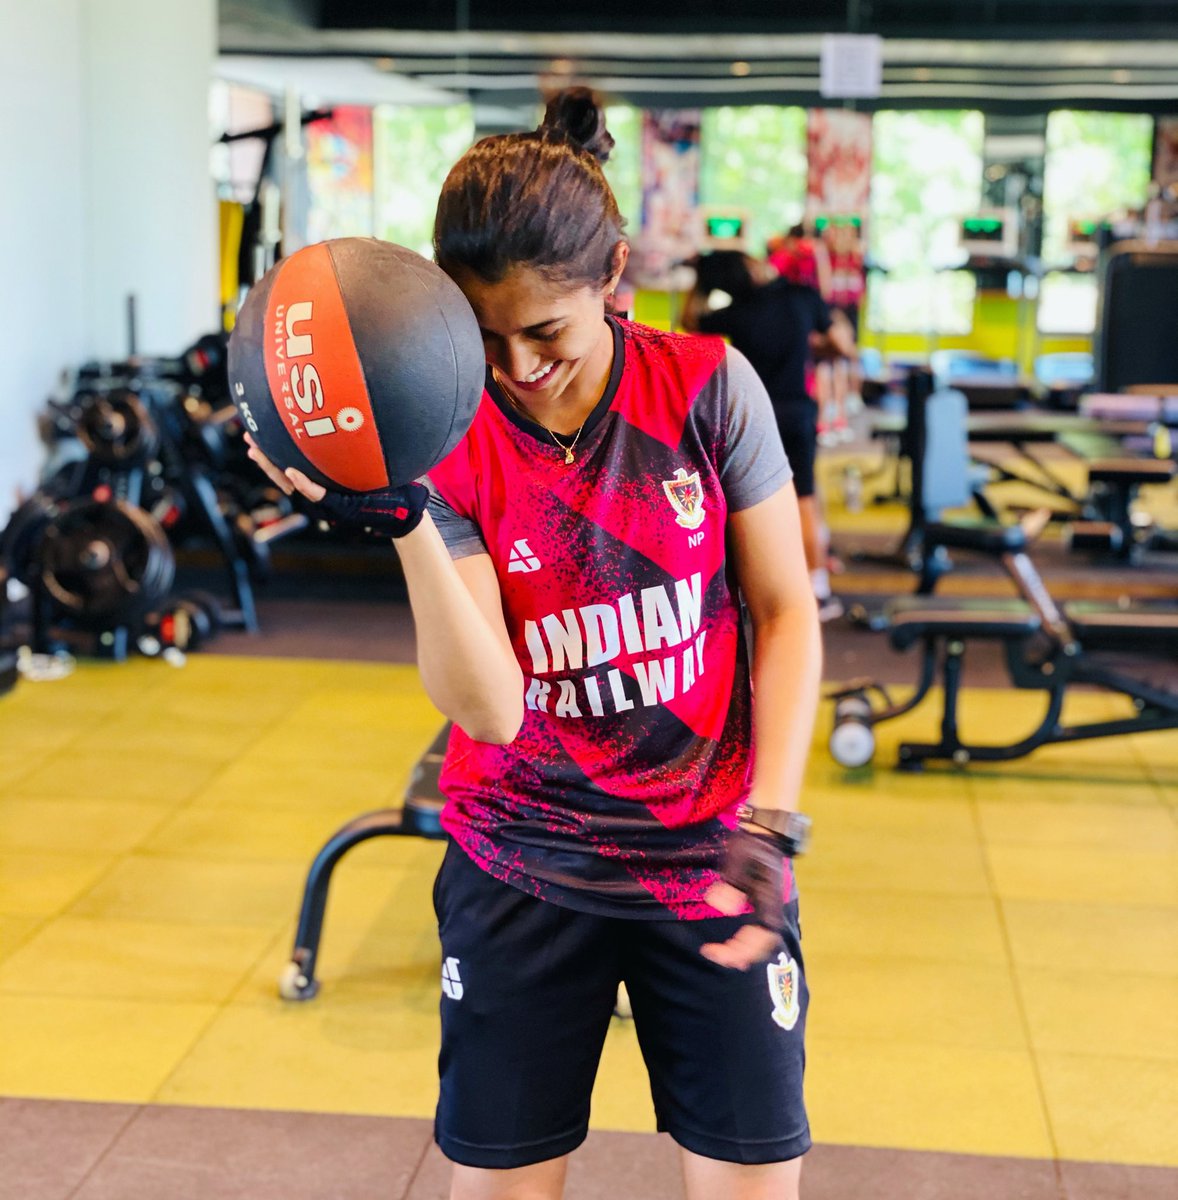 For me, Working out is Power, Self Love & Therapy !
#gymismytherapy ✨ #nuzhatparween 
#candid #happymemories #ssparksports